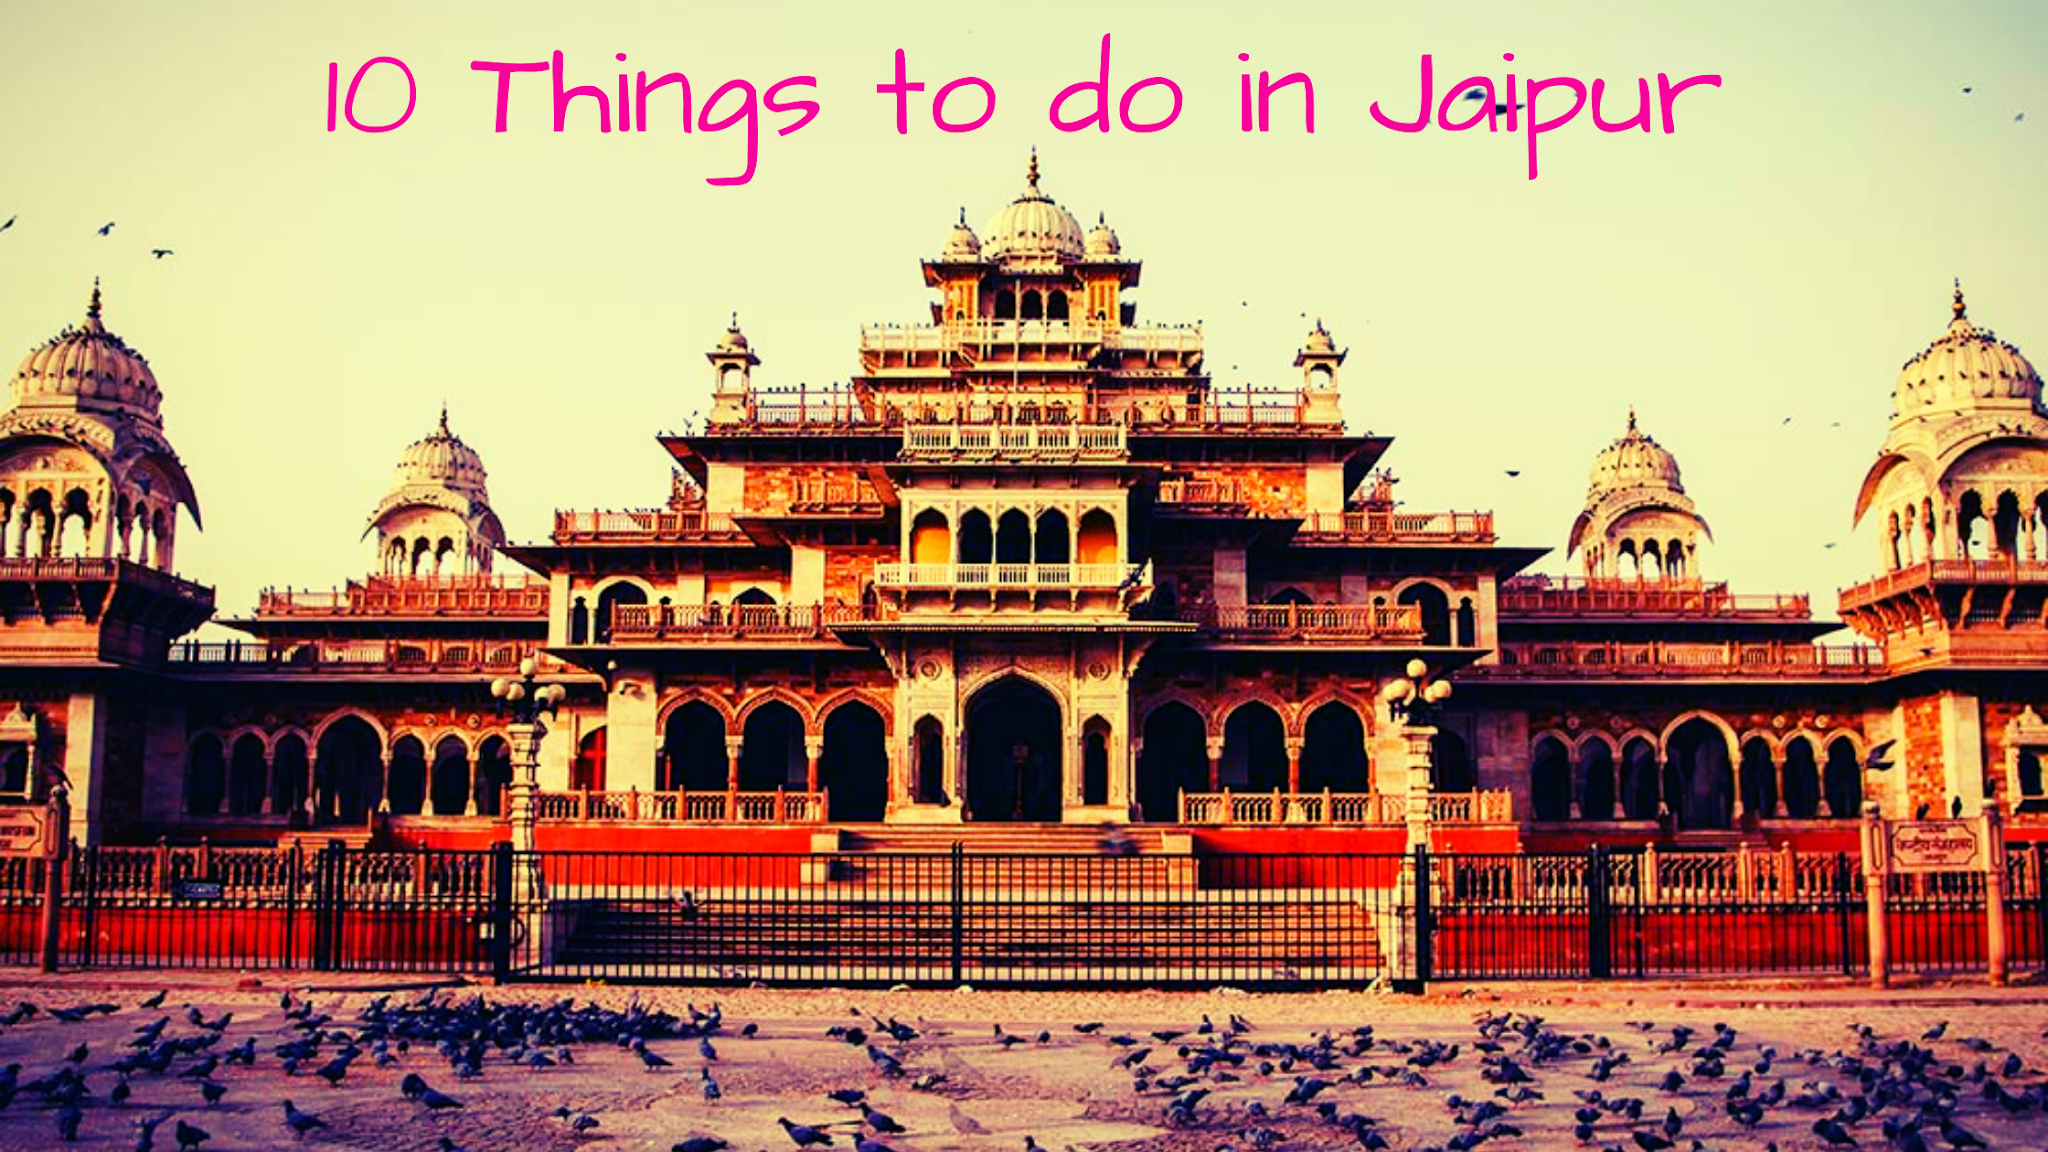 Top 10 Things to do in Jaipur 